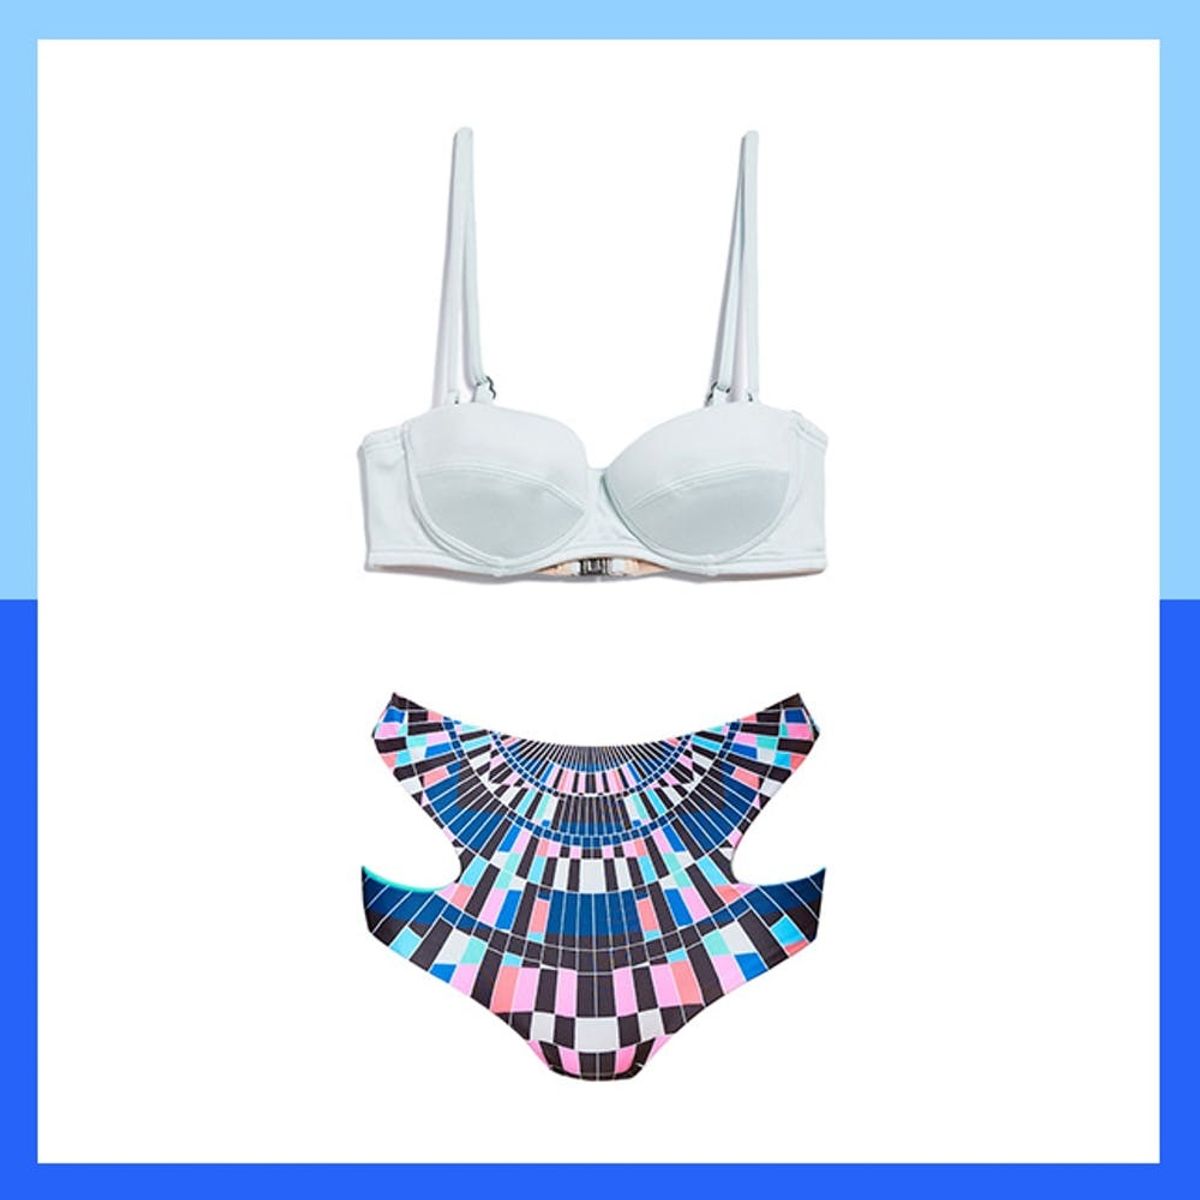 13 Bandeau Bikini Tops  and Bottoms That Will Send Tan Lines Packin’